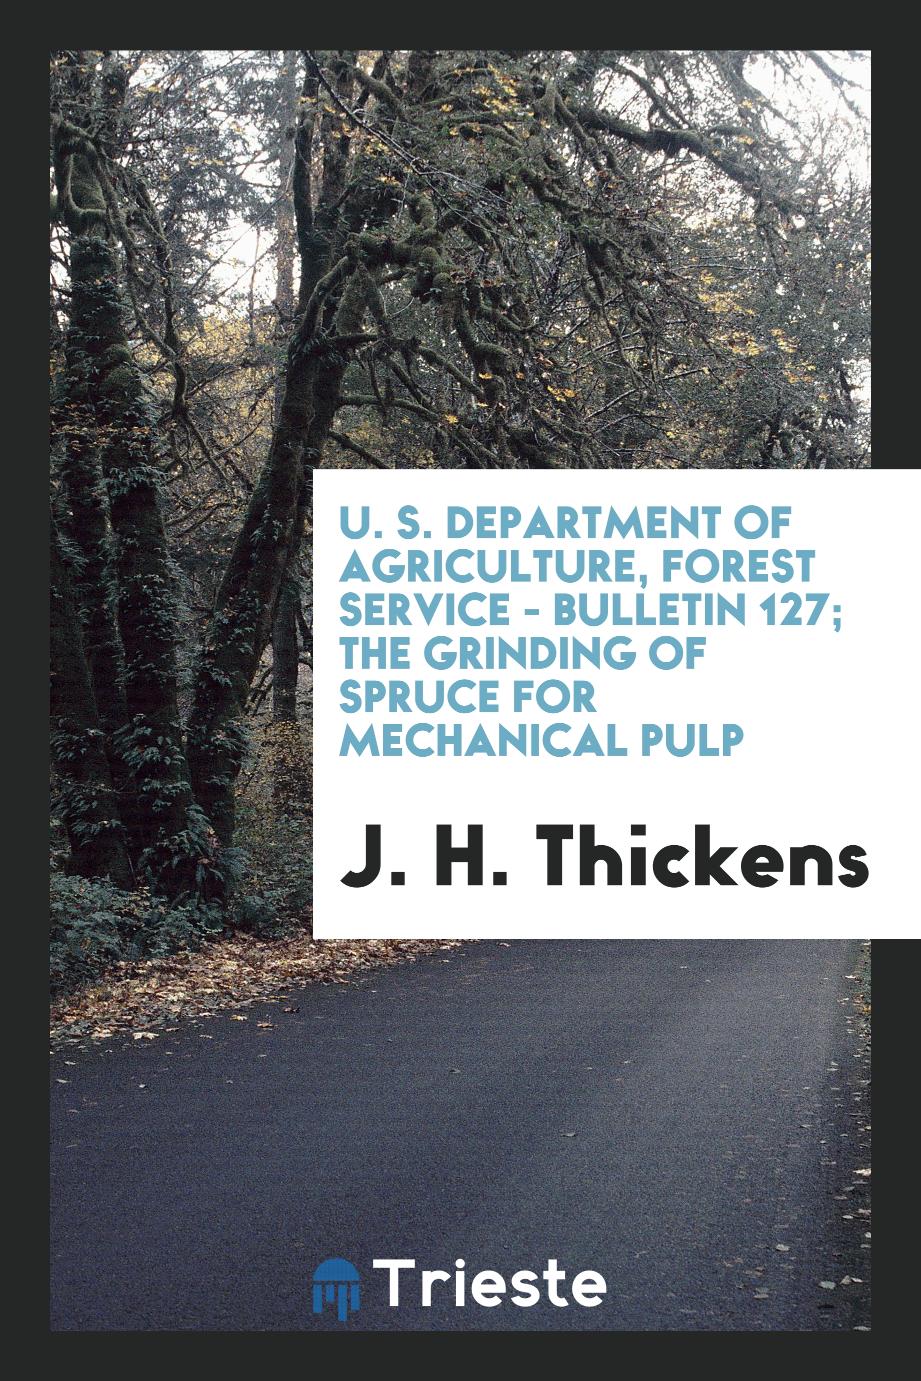 U. S. Department of Agriculture, Forest Service - Bulletin 127; The Grinding of Spruce for Mechanical Pulp